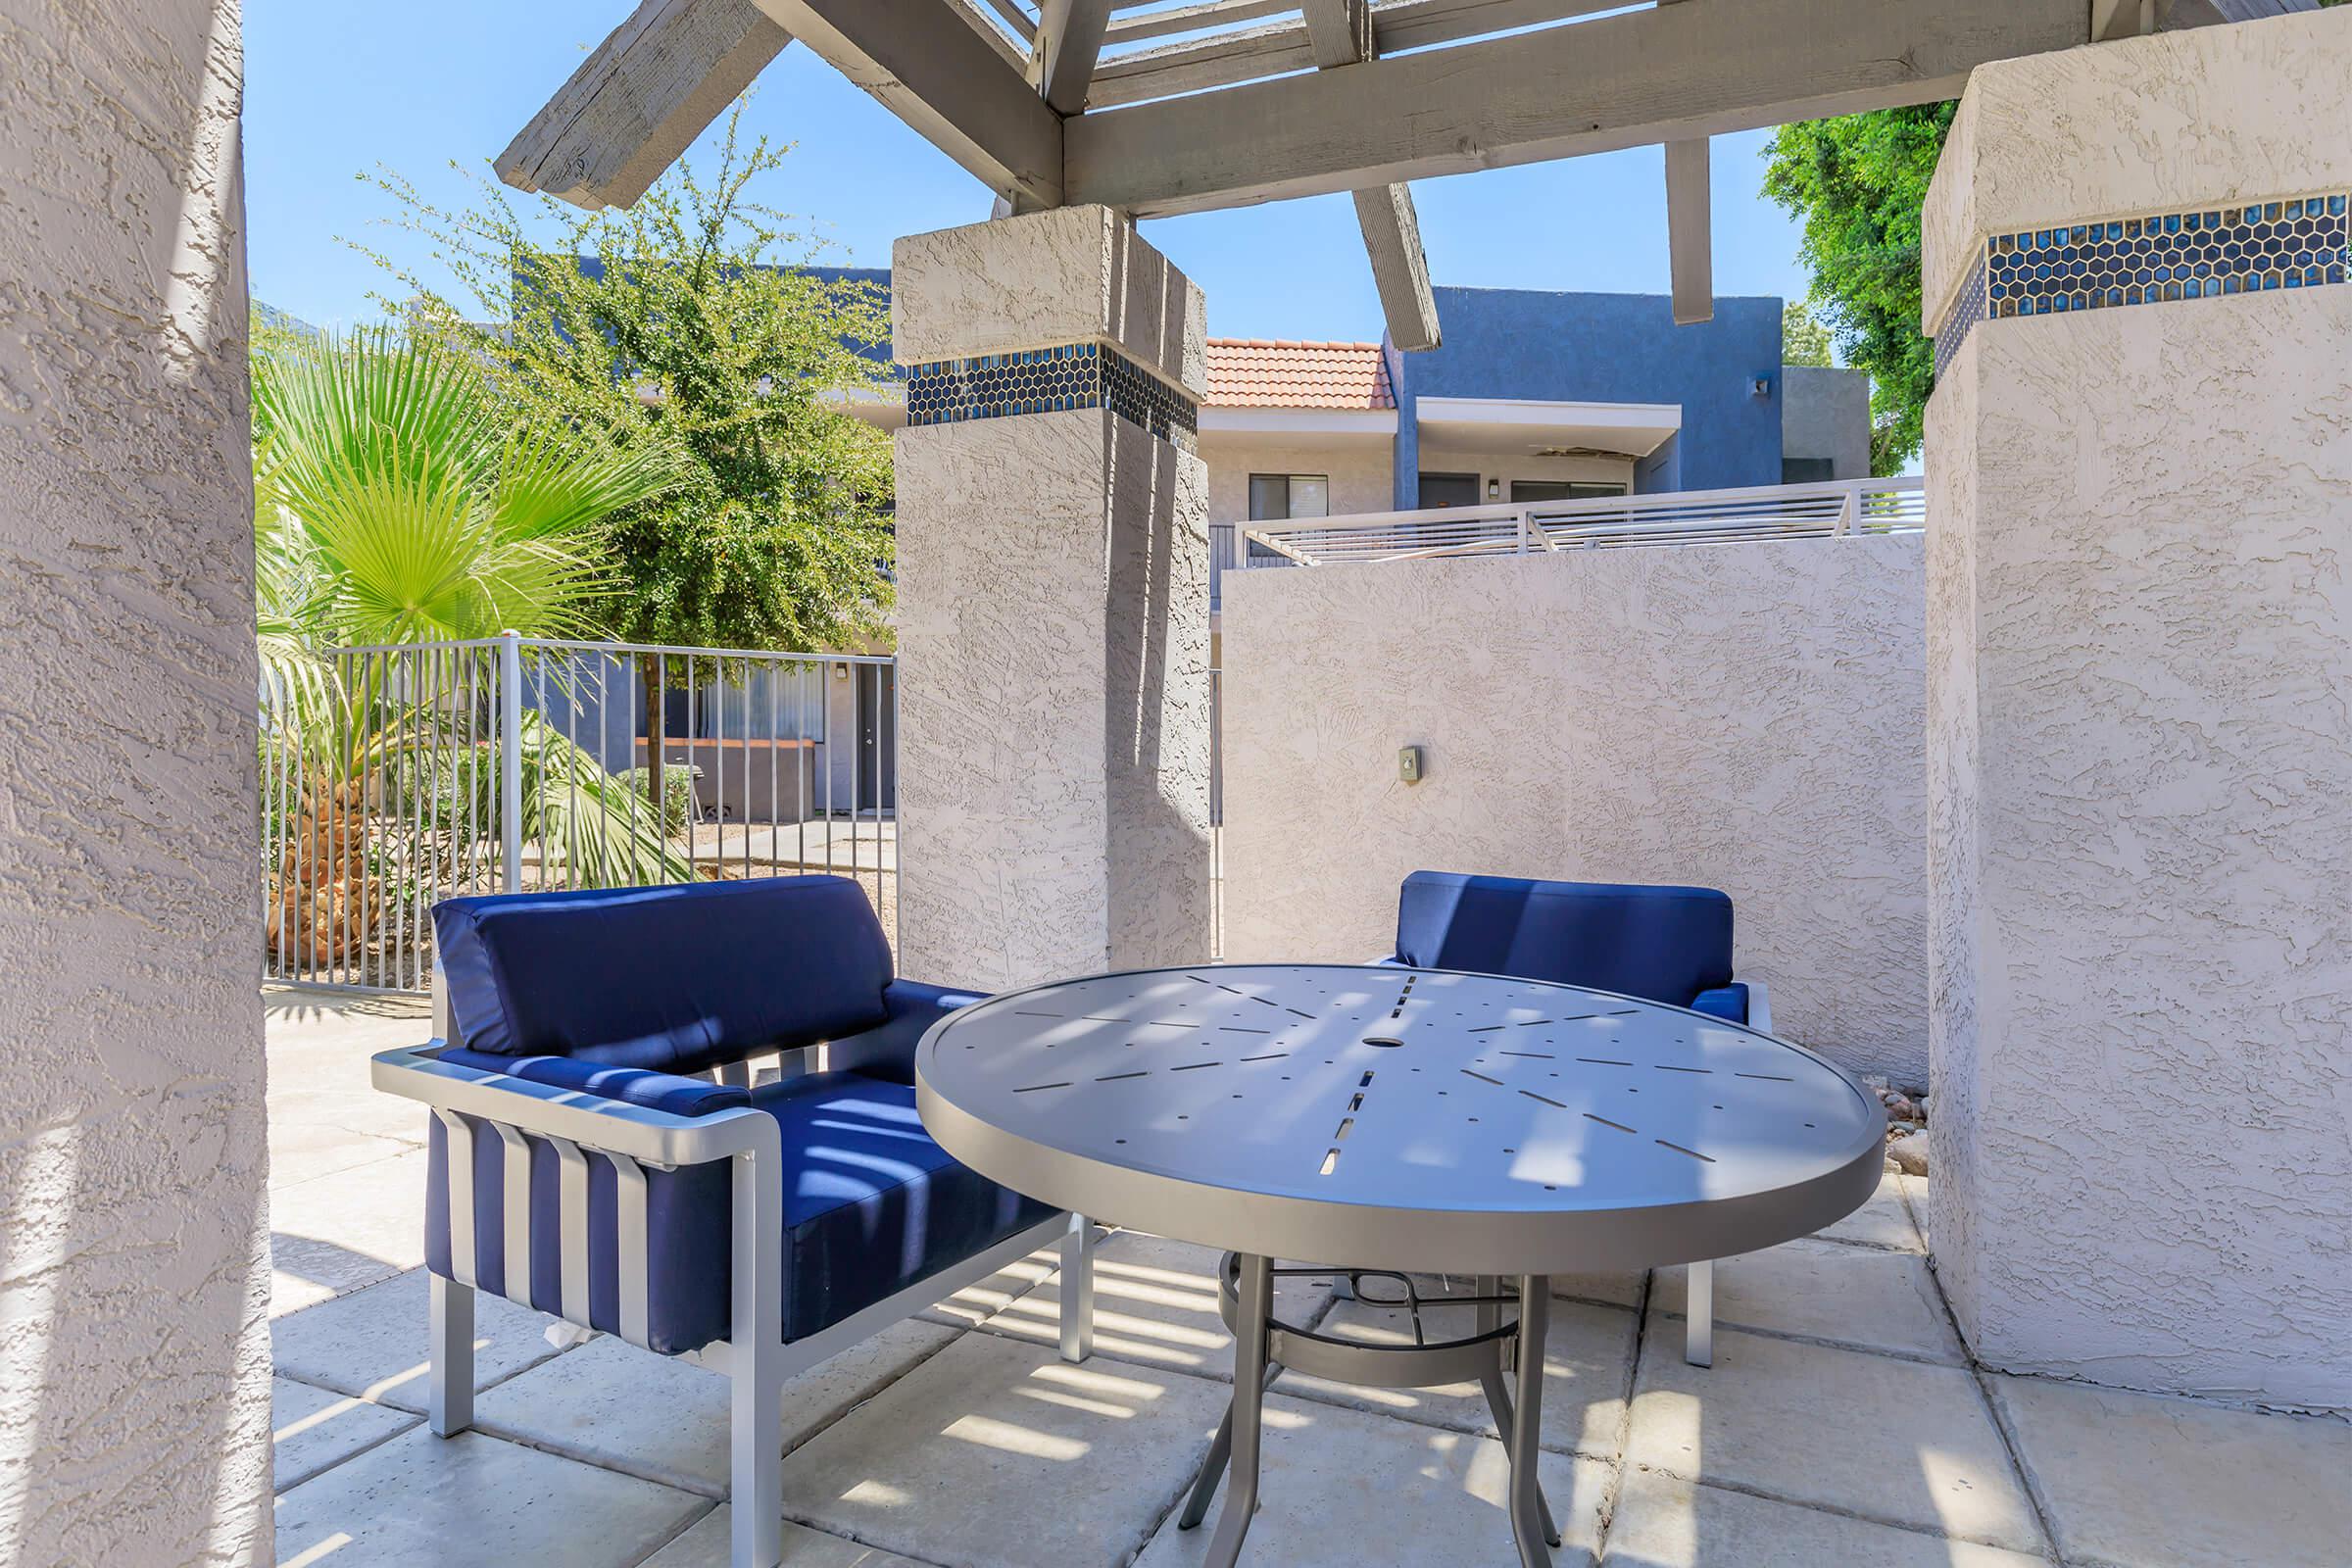 Shaded seating area and table near the Phoenix apartment outdoor pool